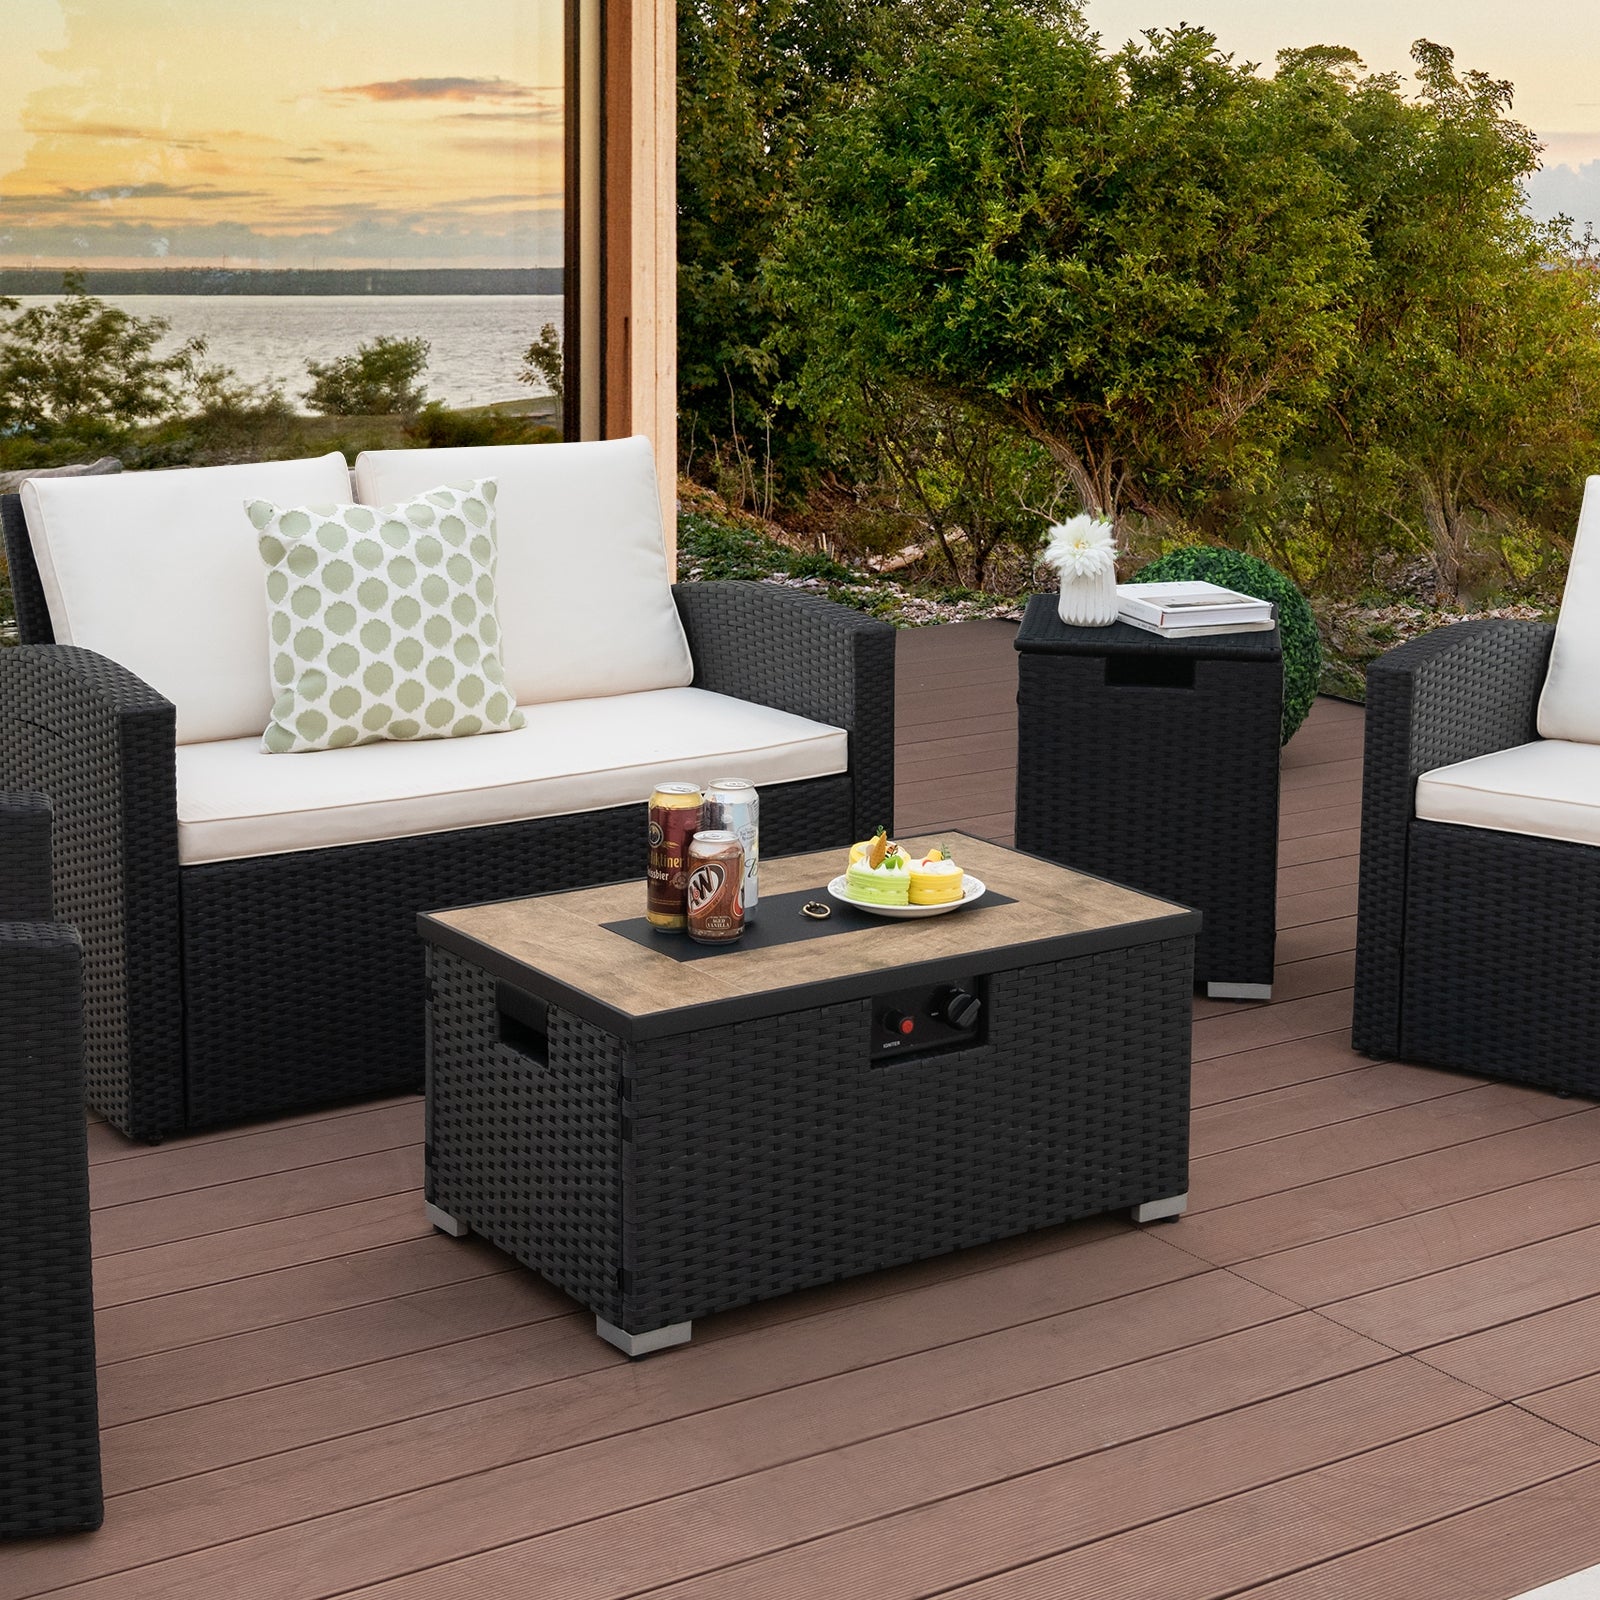 32 Inch x 20 Inch Propane Rattan Fire Pit Table Set with Side Table Tank and Cover at Gallery Canada